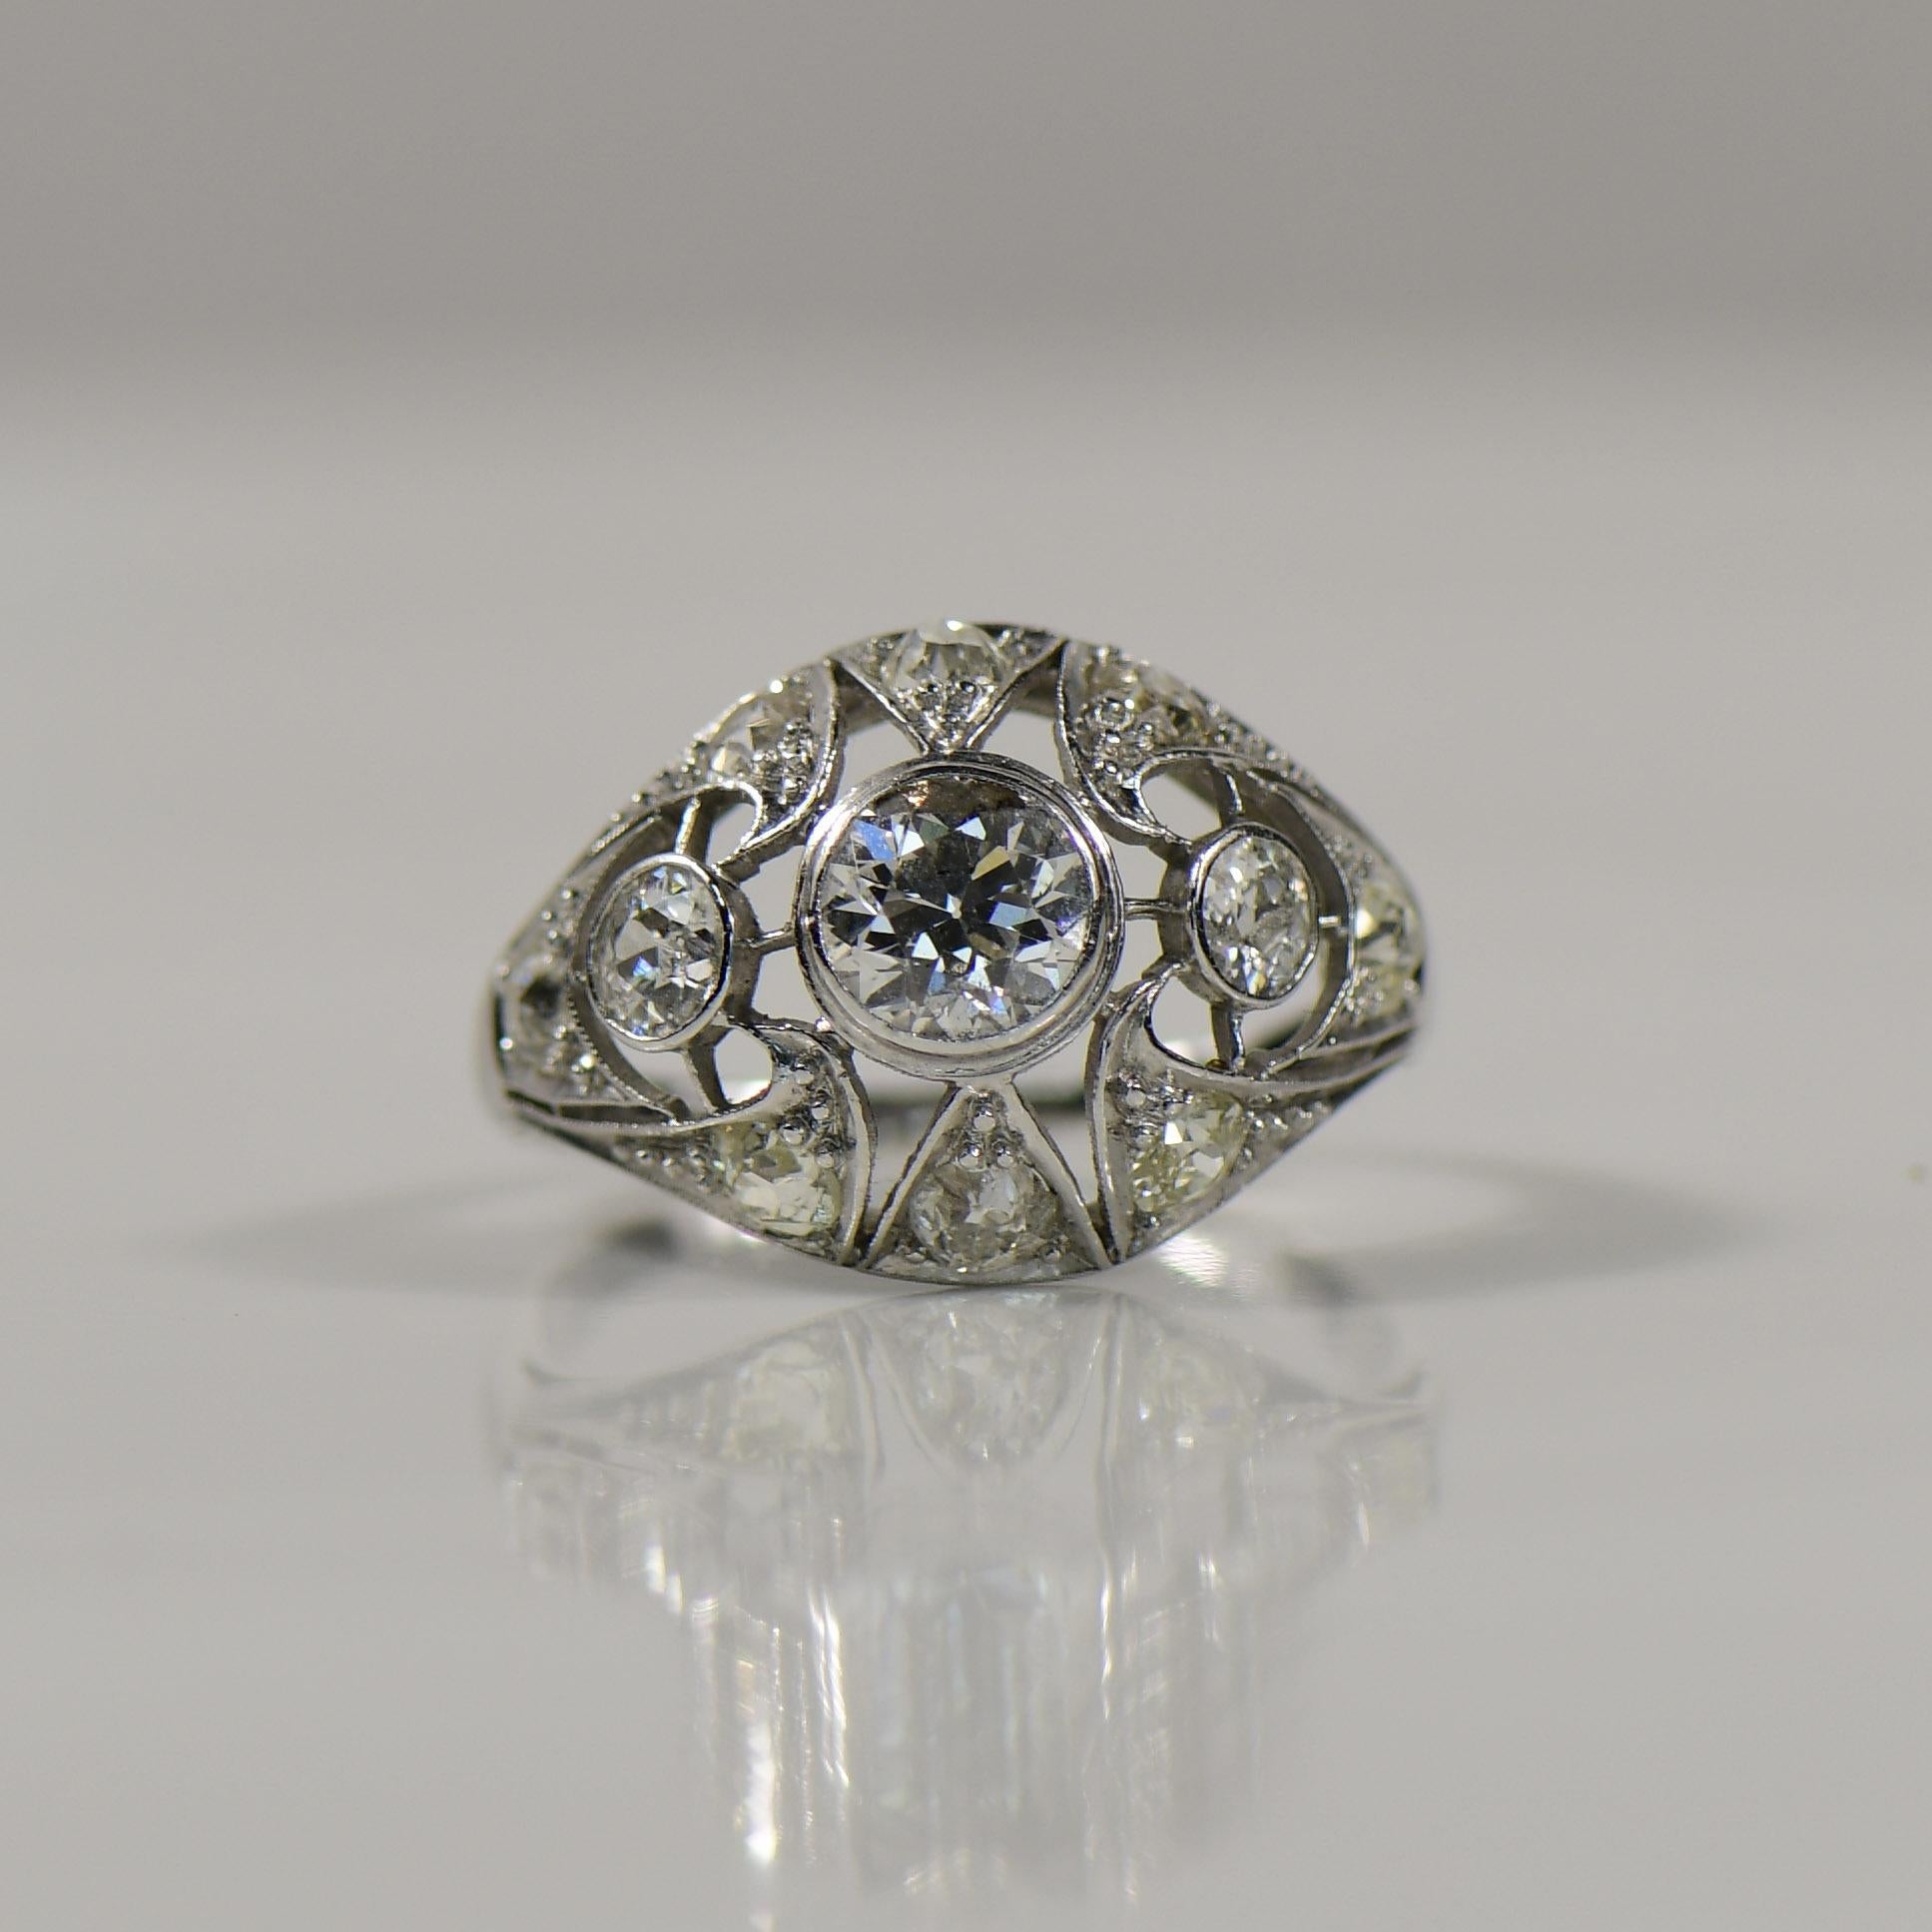 Elegance takes center stage in this Art Deco-inspired platinum cocktail ring, where meticulous craftsmanship meets vintage allure. The geometric openwork design, intricately fashioned in platinum, exudes a timeless sophistication reminiscent of the